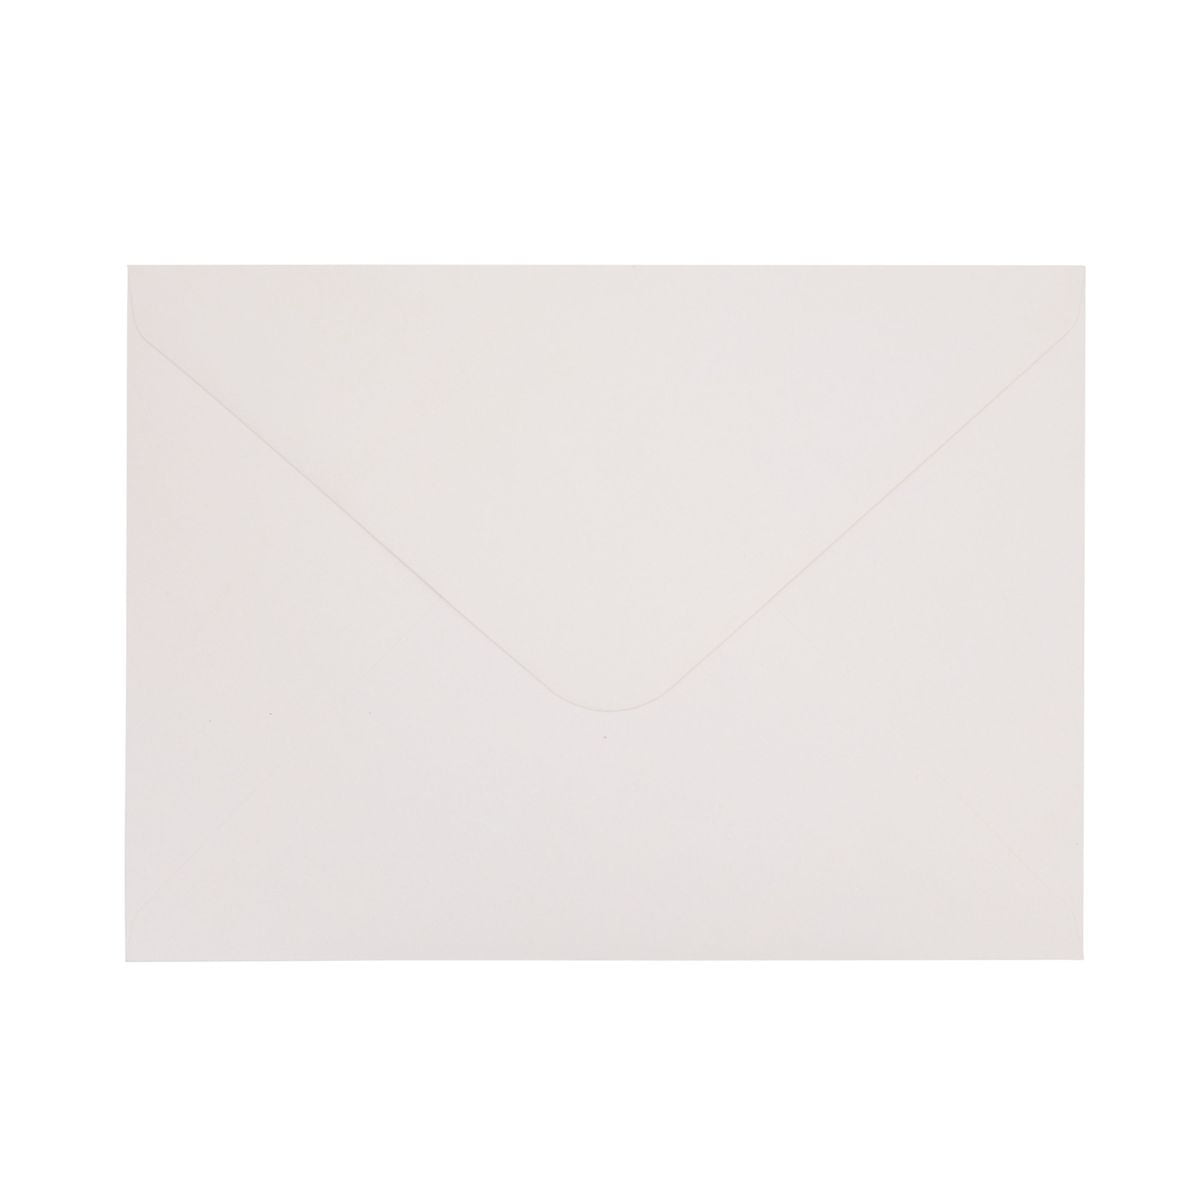 A7 Ivory Envelopes with Floral Liner for Wedding Invitations (5x7 in, 50 Pack)